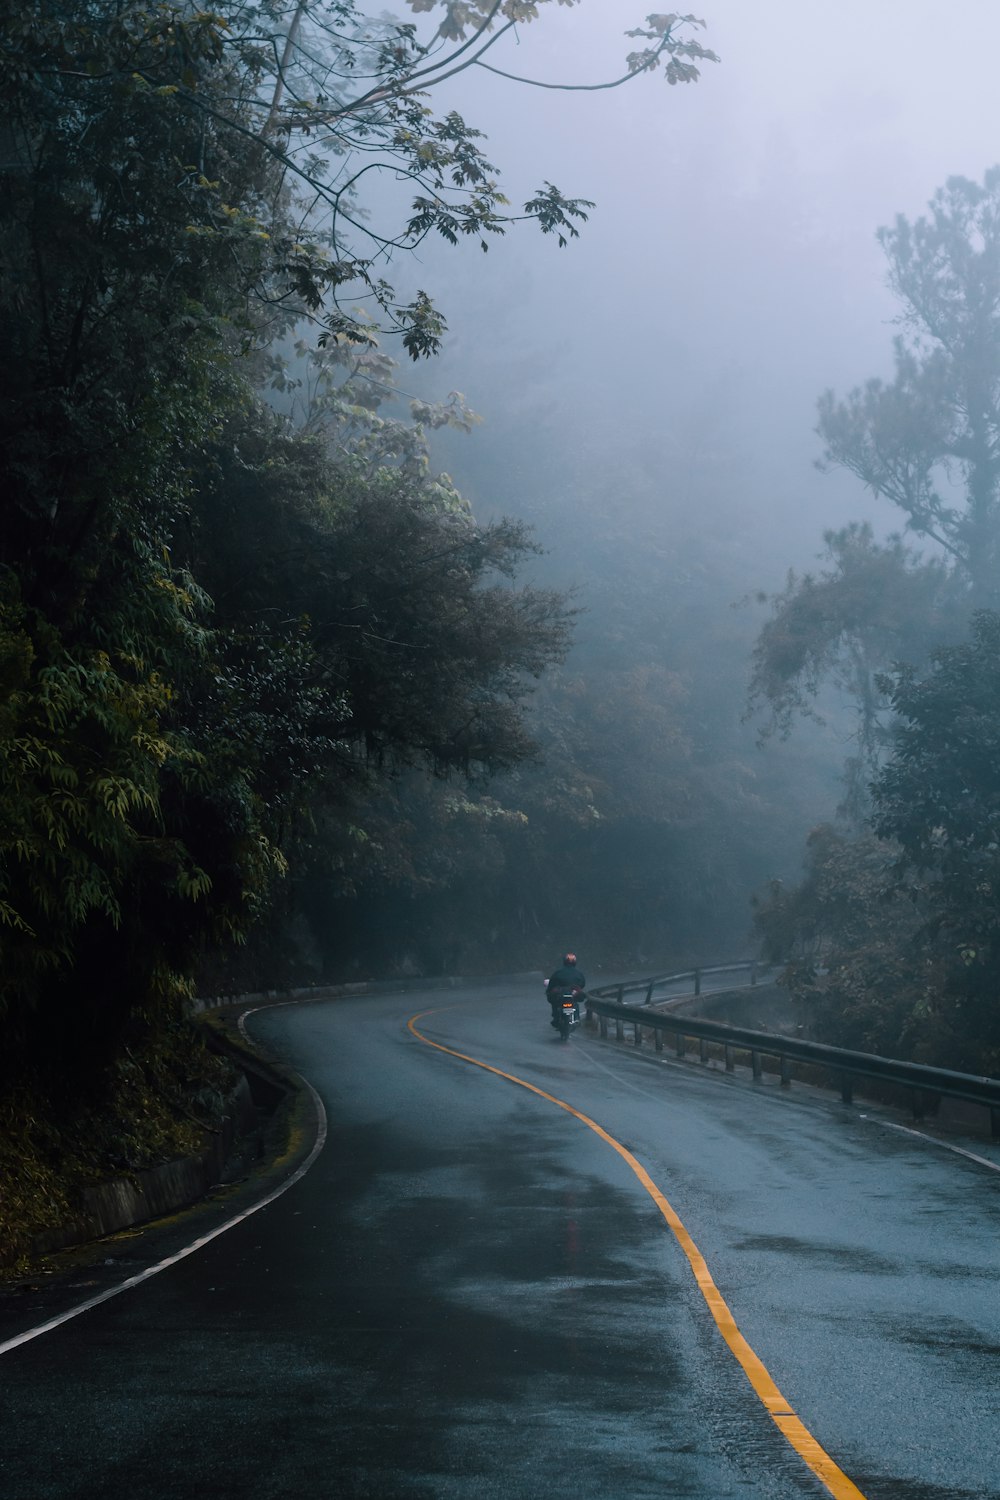 black car on road between trees during foggy weather